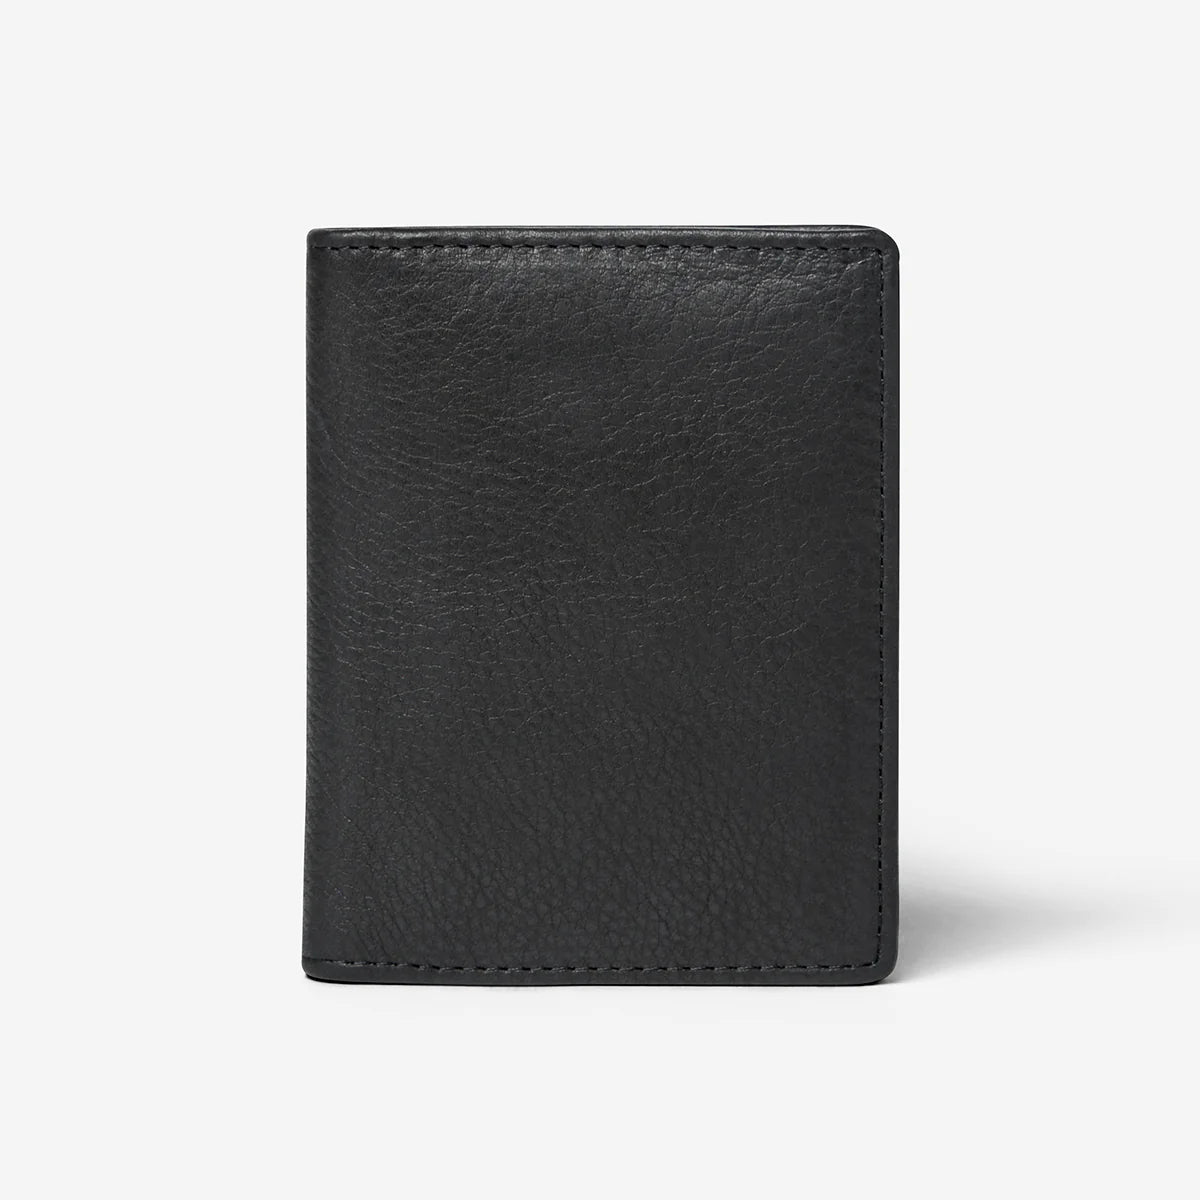 Osgoode Marley Leather RFID Flipfold Leather Wallet- 1203